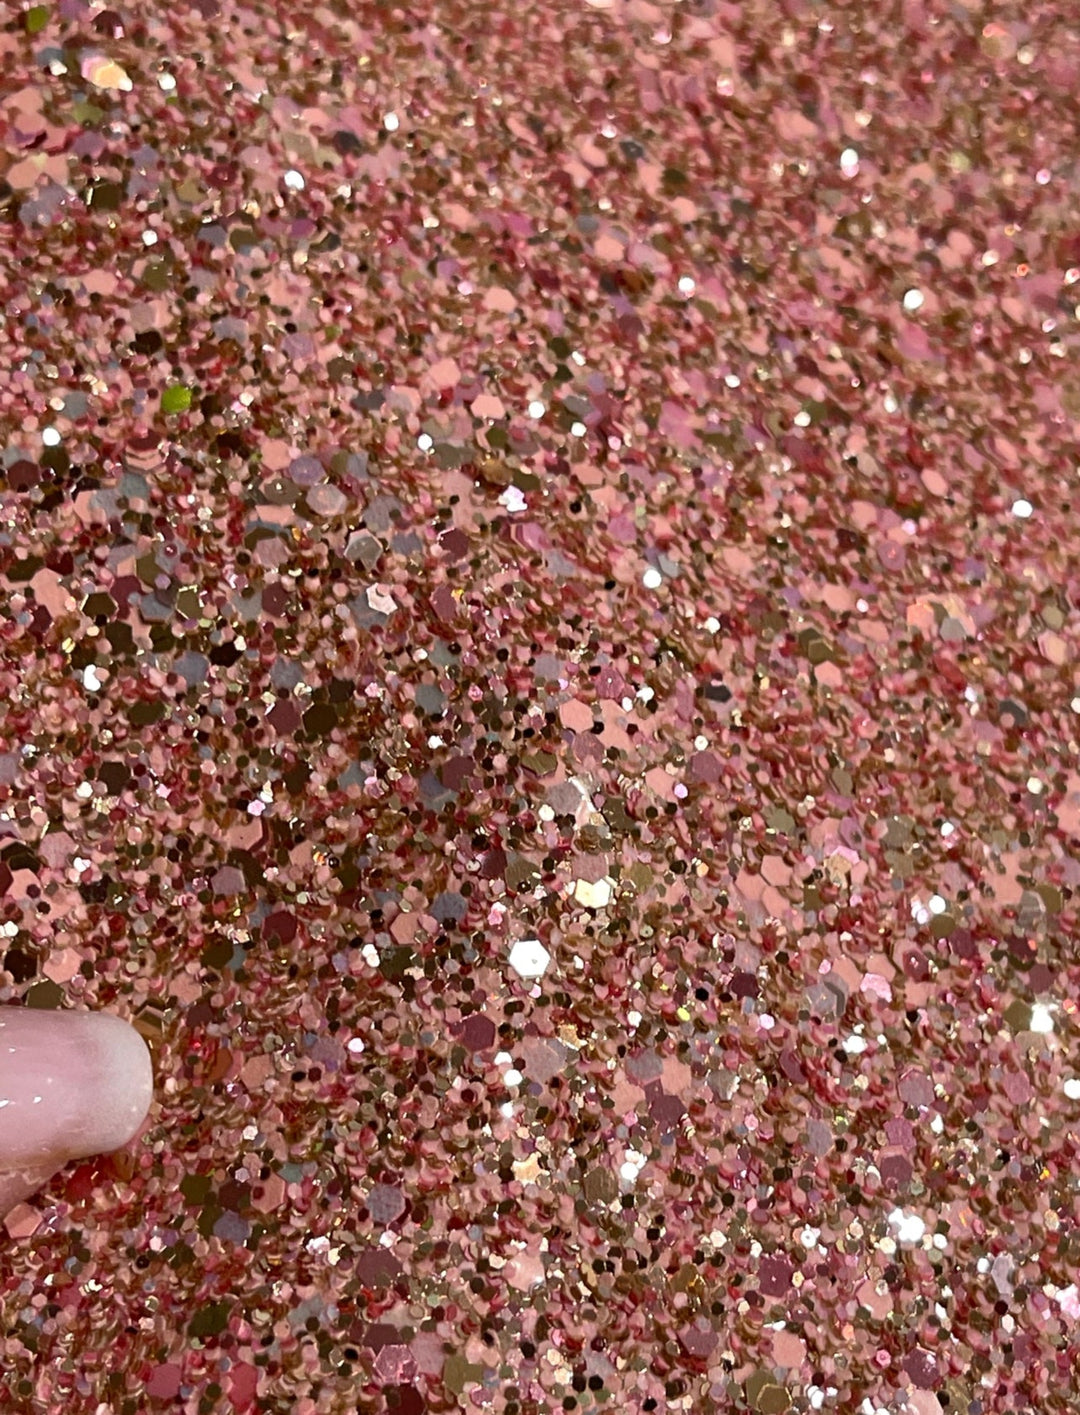 Madly Blush Pink Rose Gold Chunky Glitter